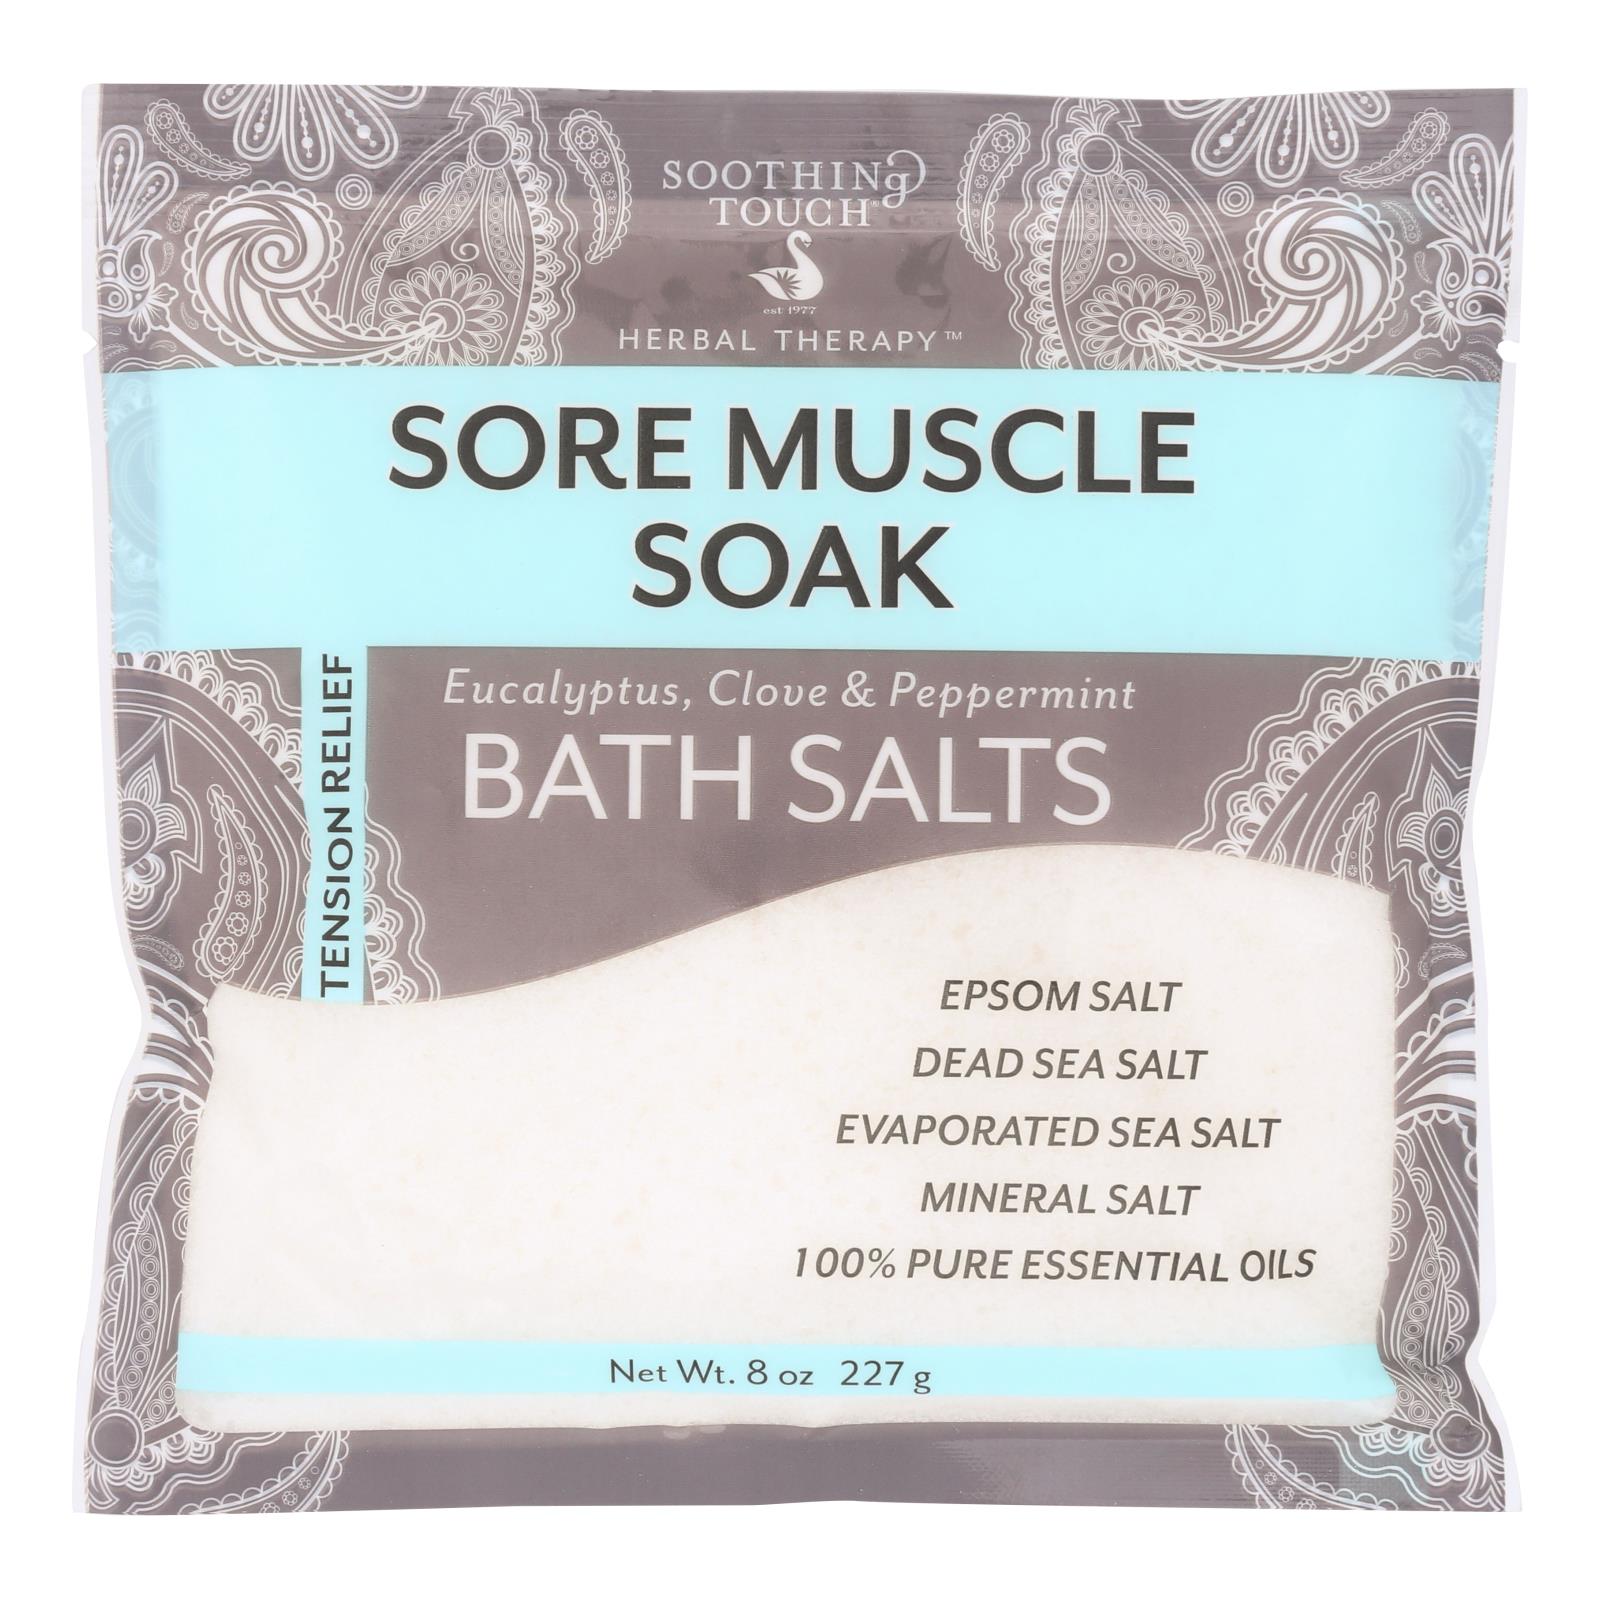 Soothing Touch Bath Salts - Muscle Soak - 6개 묶음상품 - 8 oz